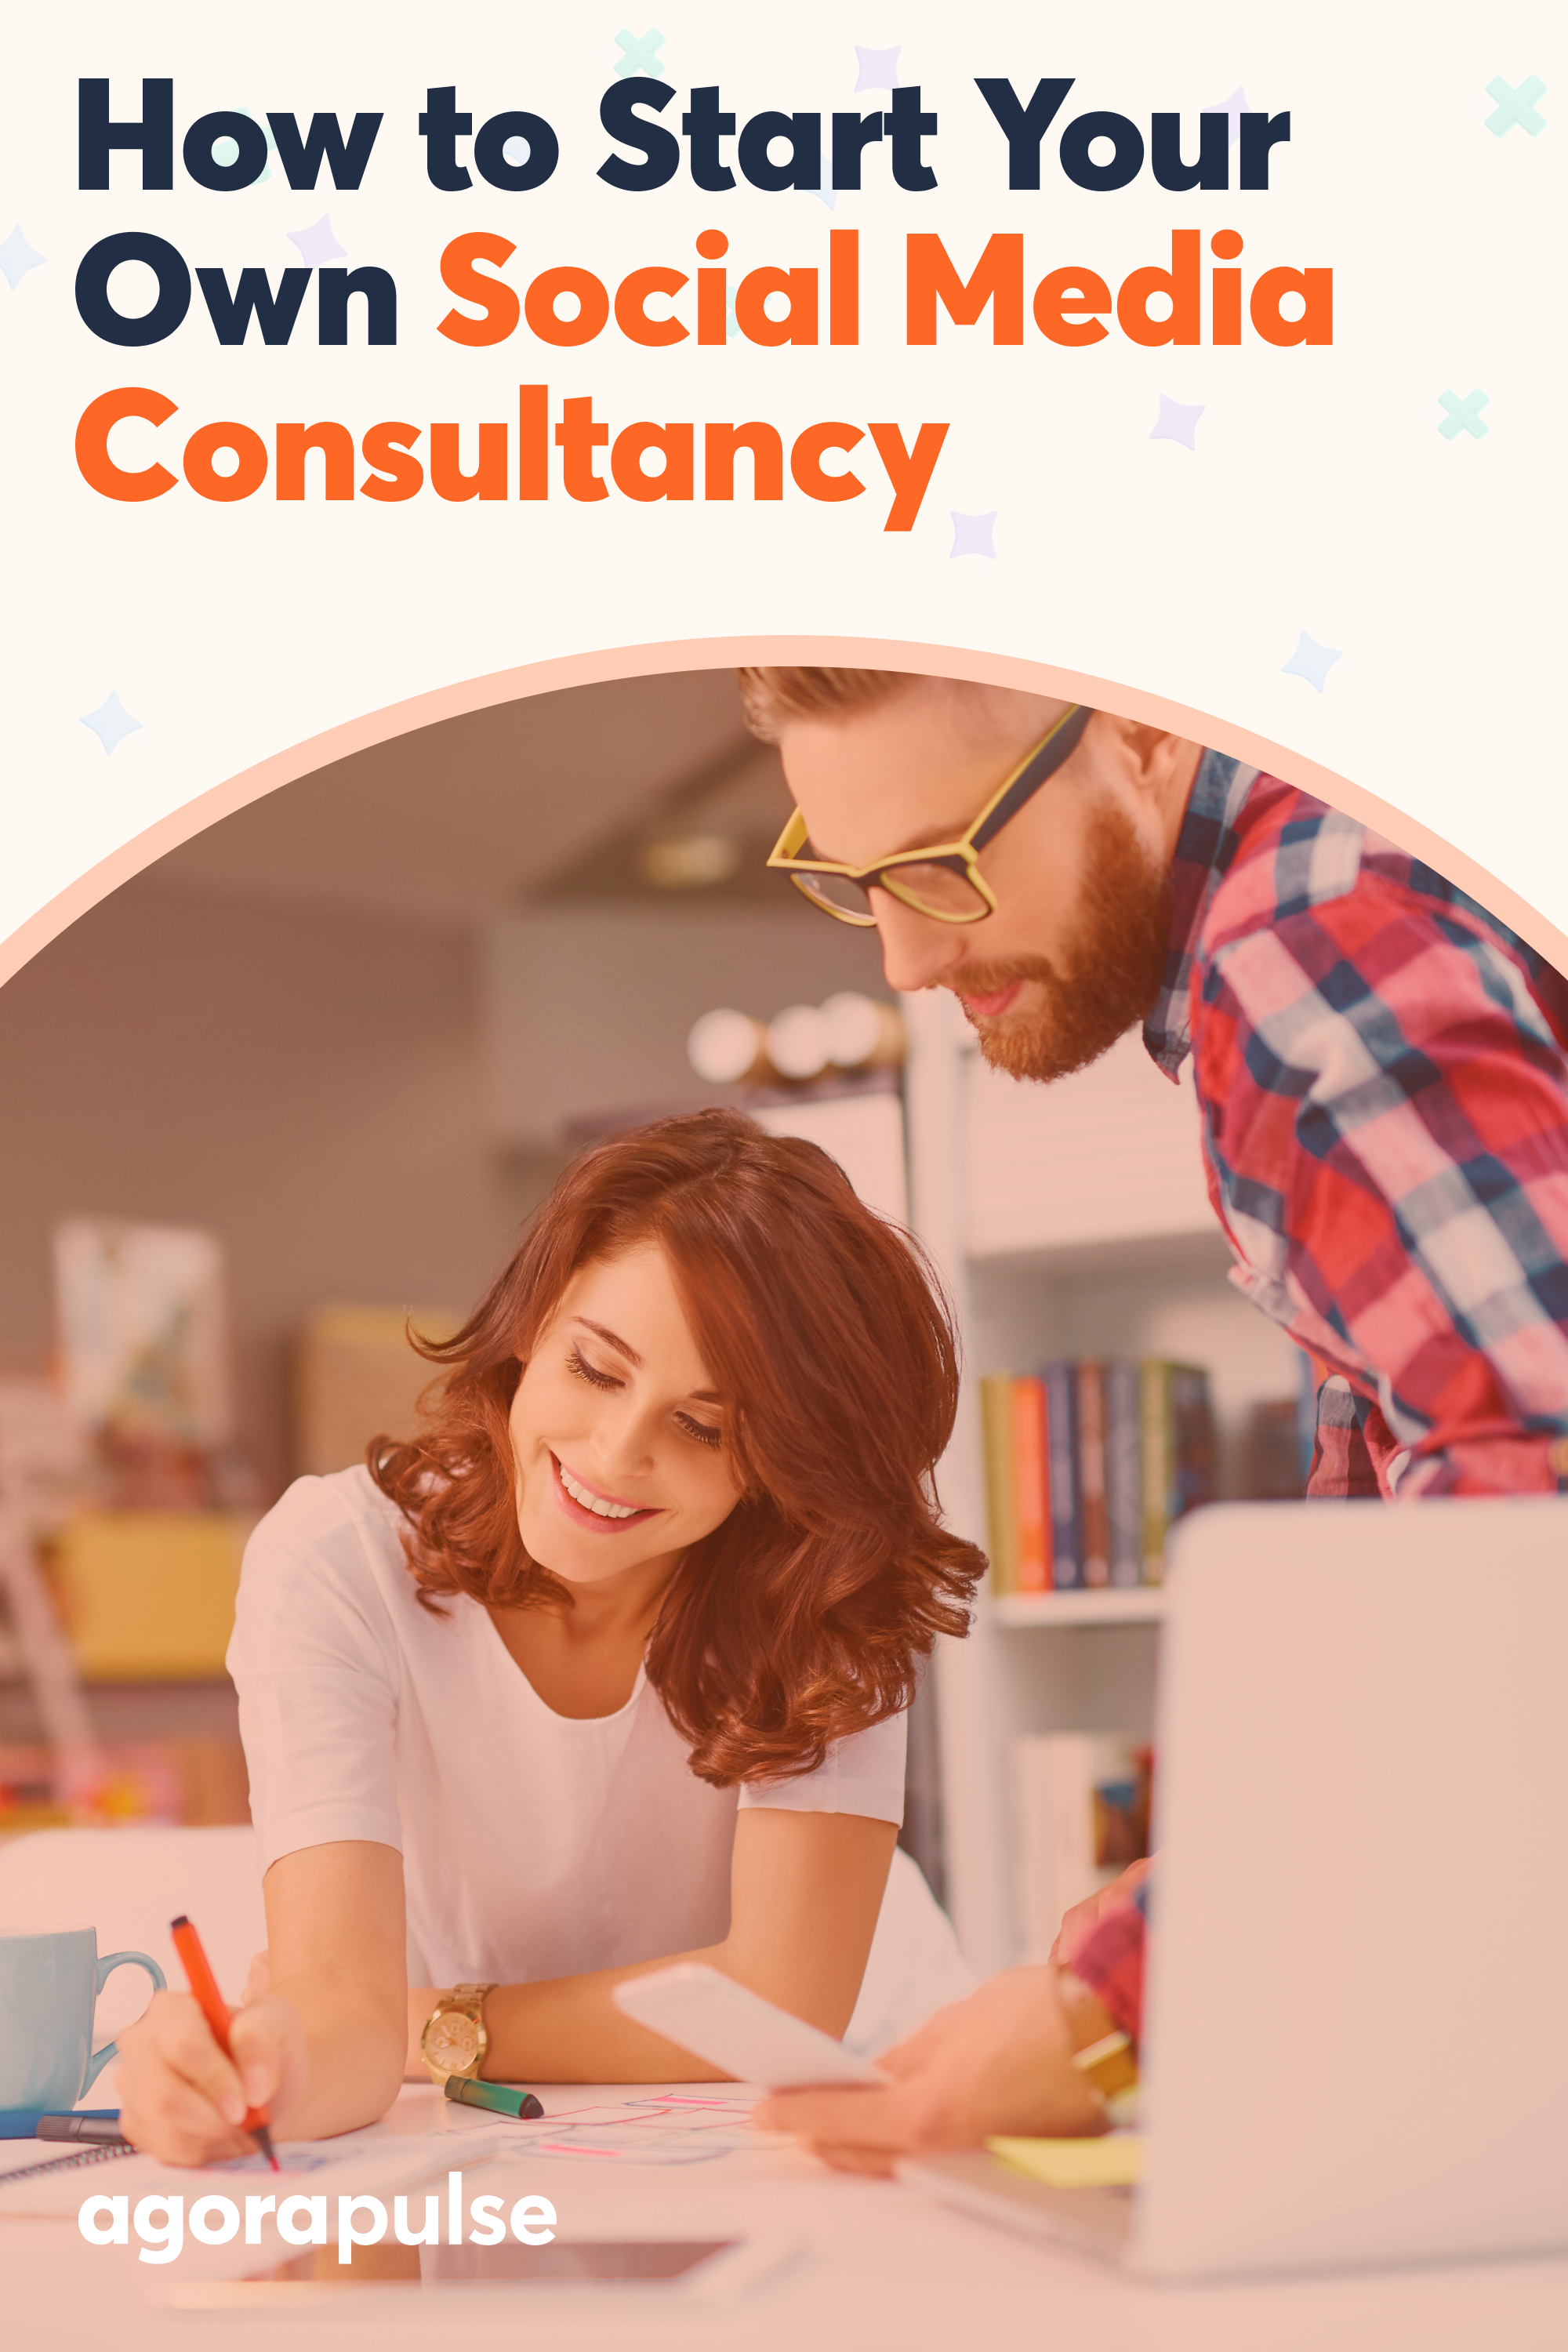 How to Start Your Own Social Media Consultancy